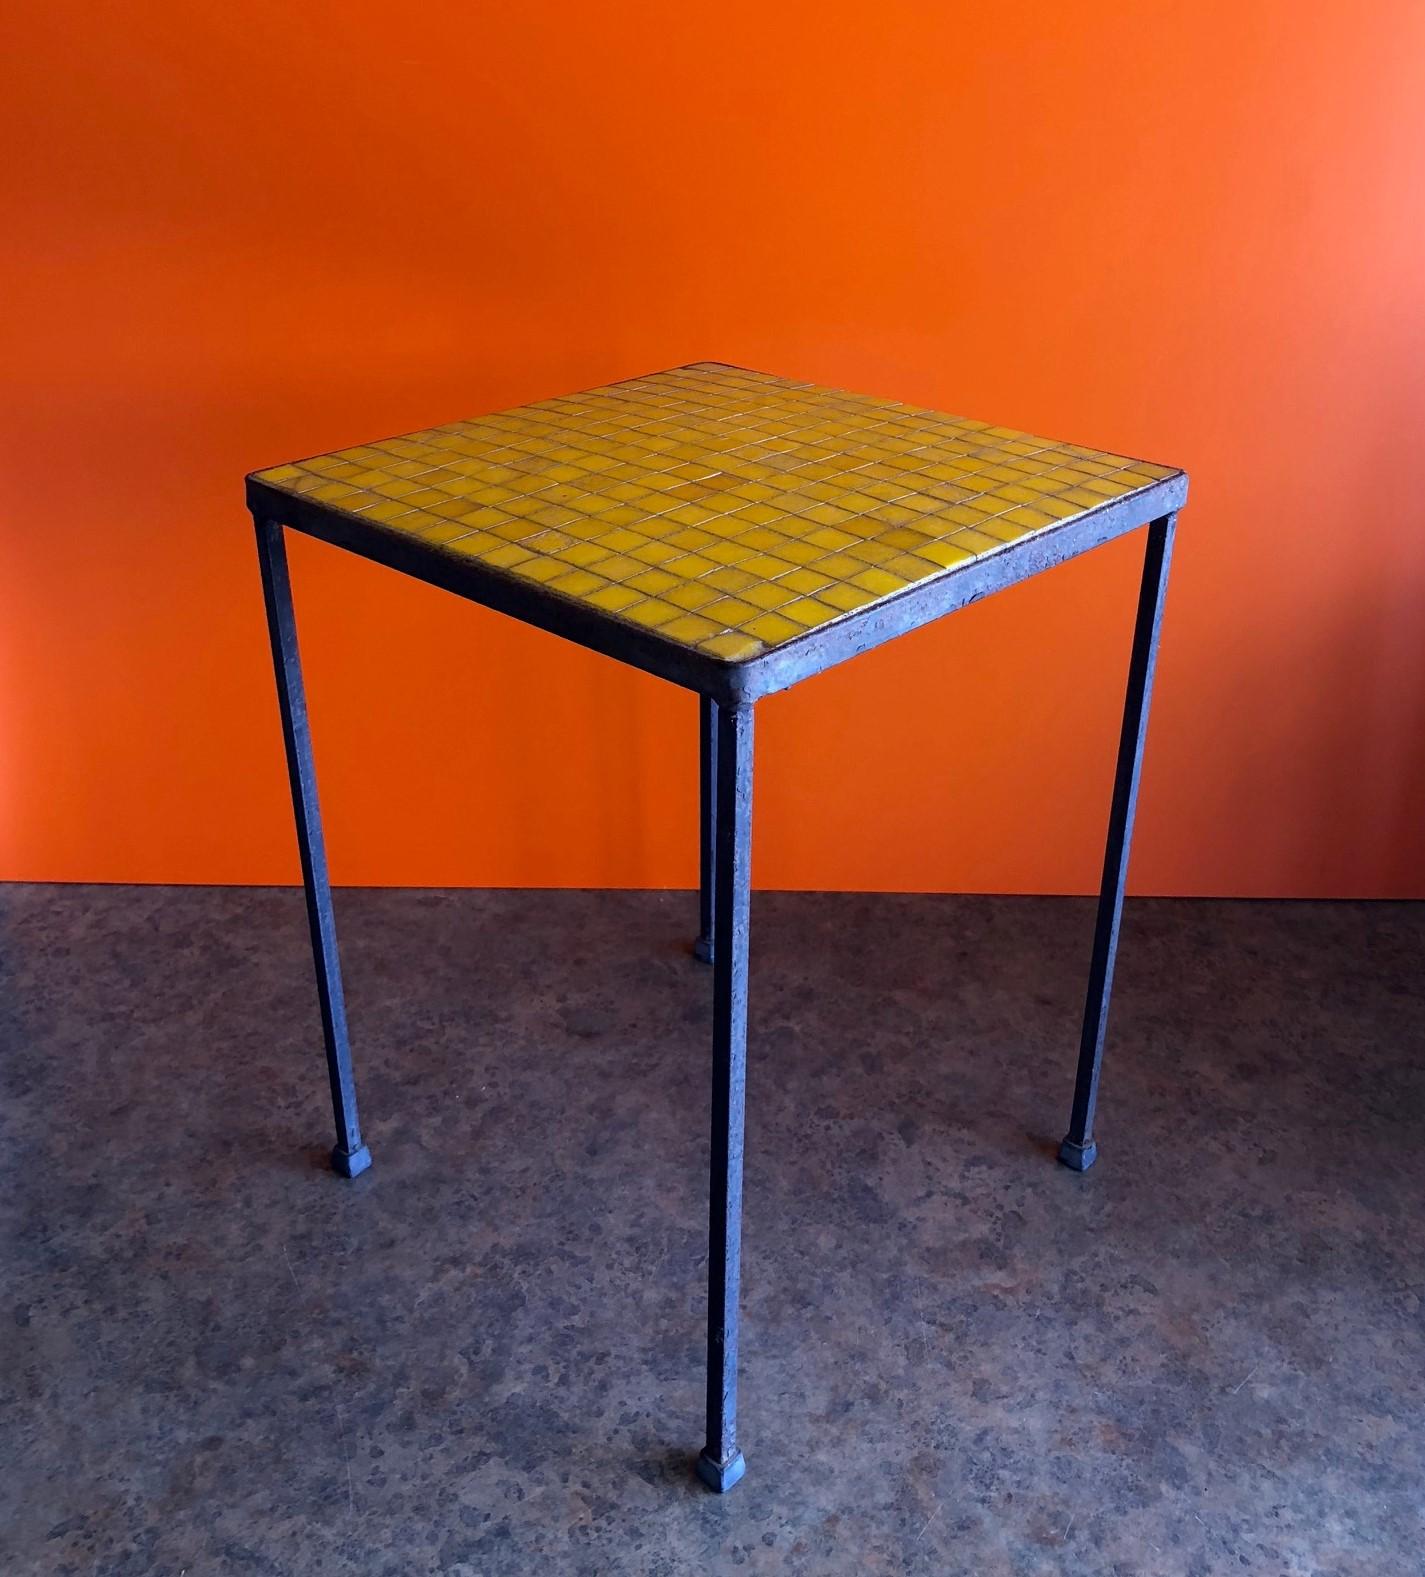 Vibrant yellow mosaic top side table in the style of Paul McCobb, circa 1960s. The table has a black iron base with mosaic glass tile tops in the shade of yellow. Would brighten up any mid-century room or work great on a covered patio!